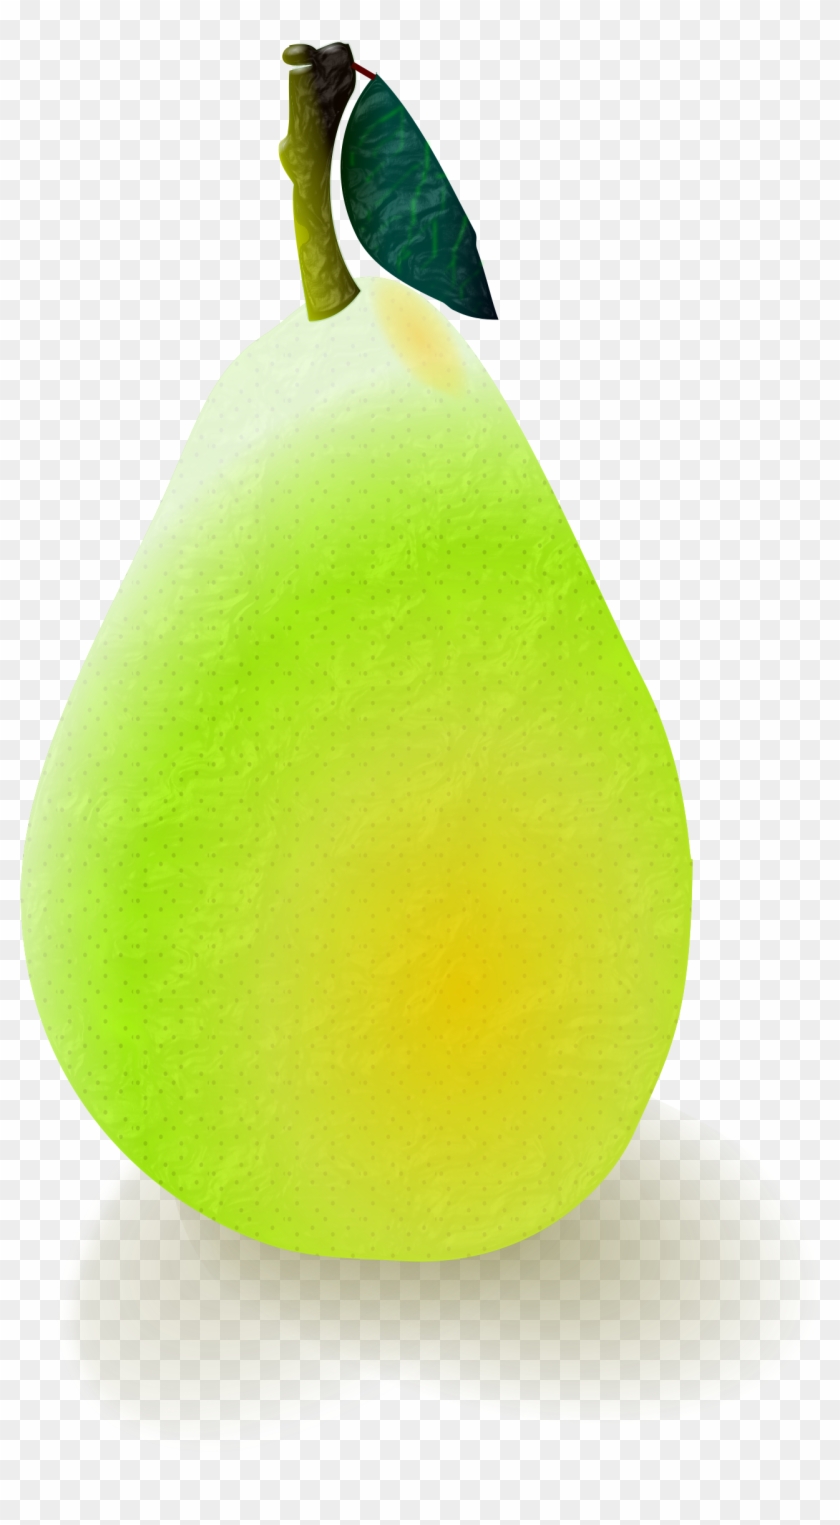 Pear - اجاص Png #440657